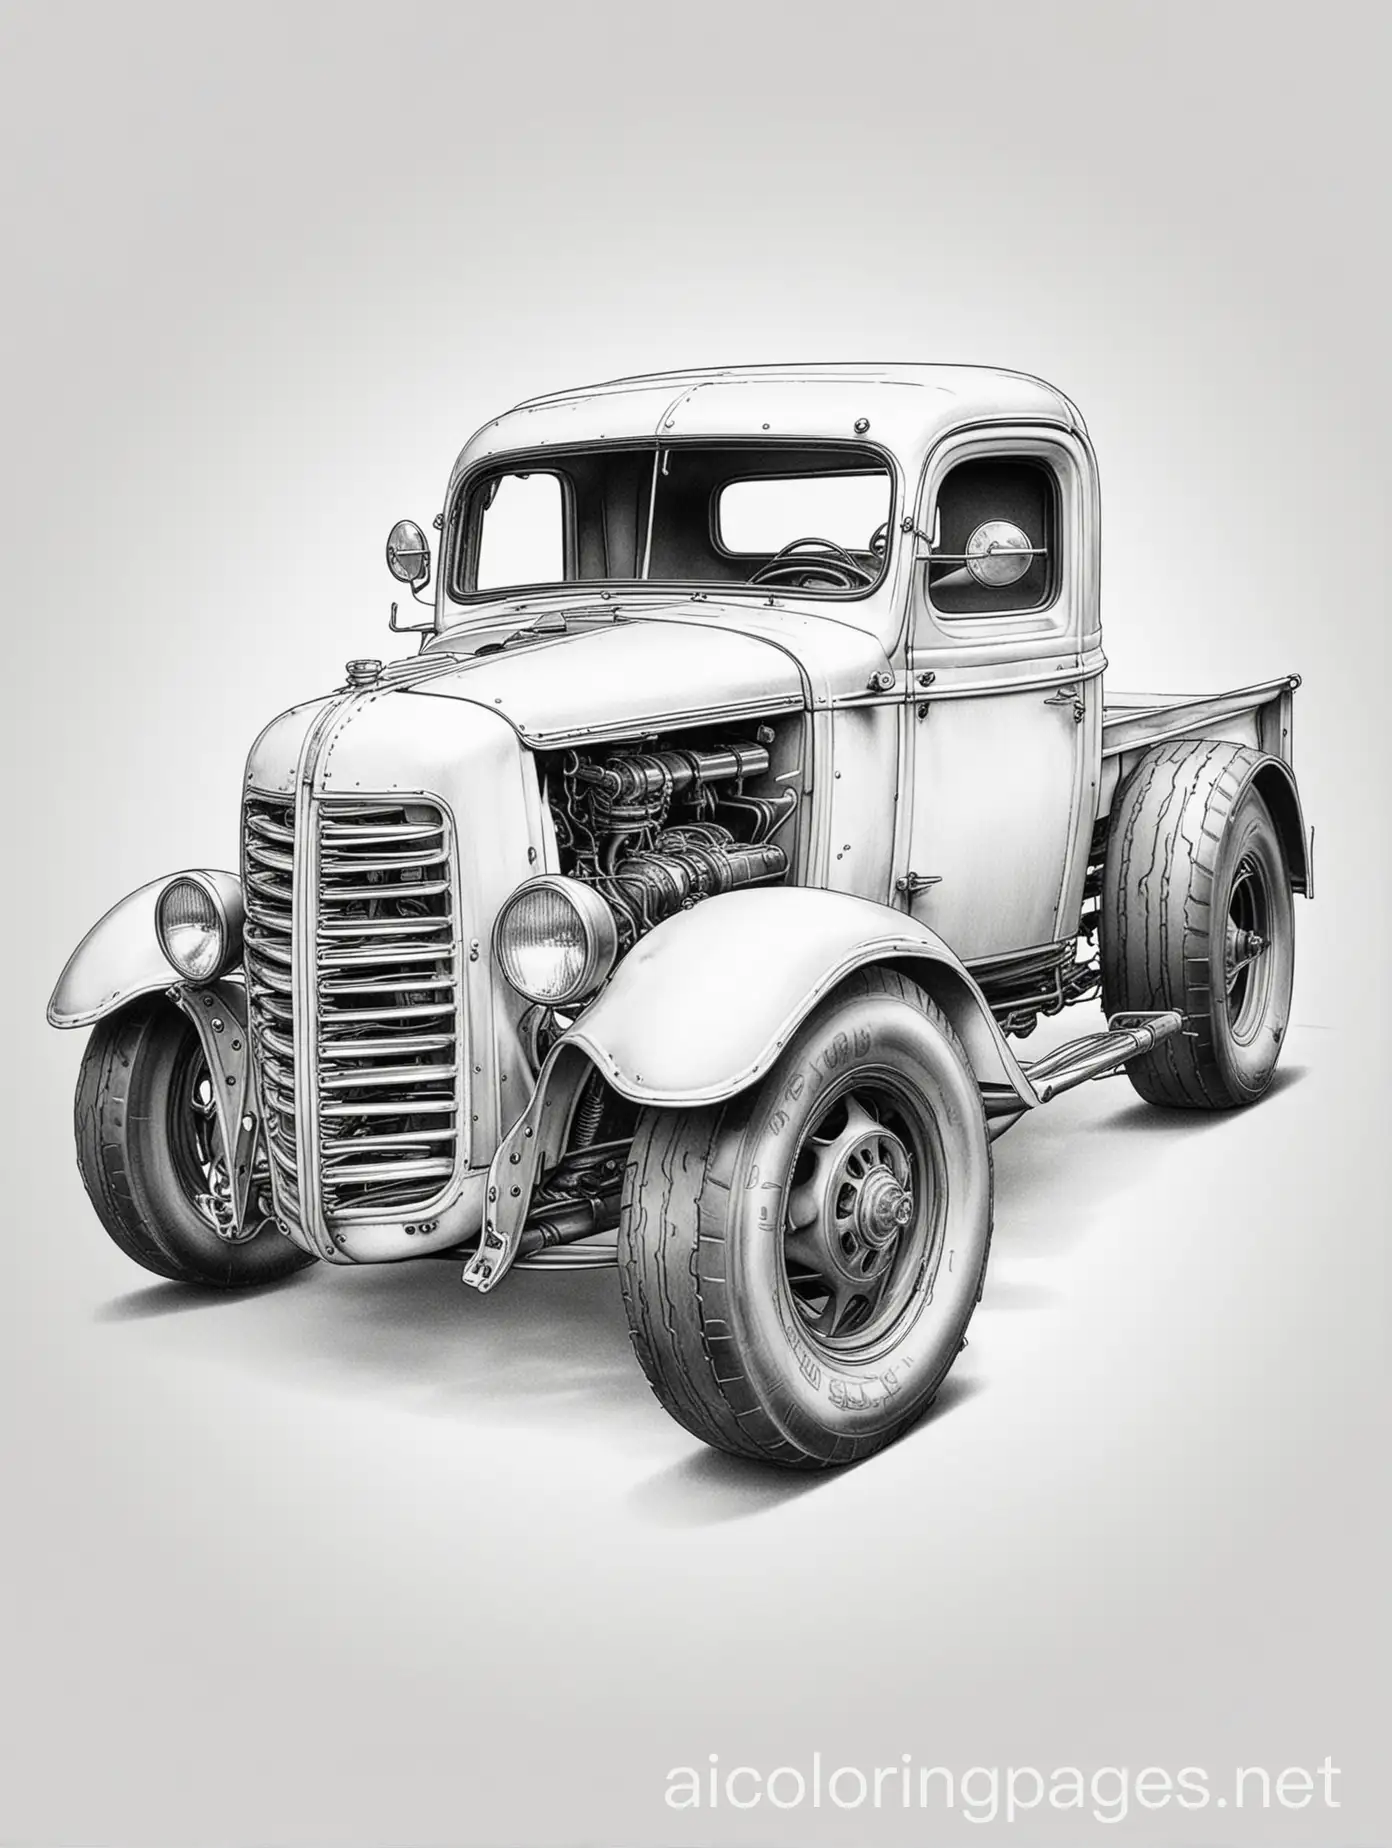 rat rod truck, Coloring Page, black and white, line art, white background, Simplicity, Ample White Space. The background of the coloring page is plain white to make it easy for young children to color within the lines. The outlines of all the subjects are easy to distinguish, making it simple for kids to color without too much difficulty